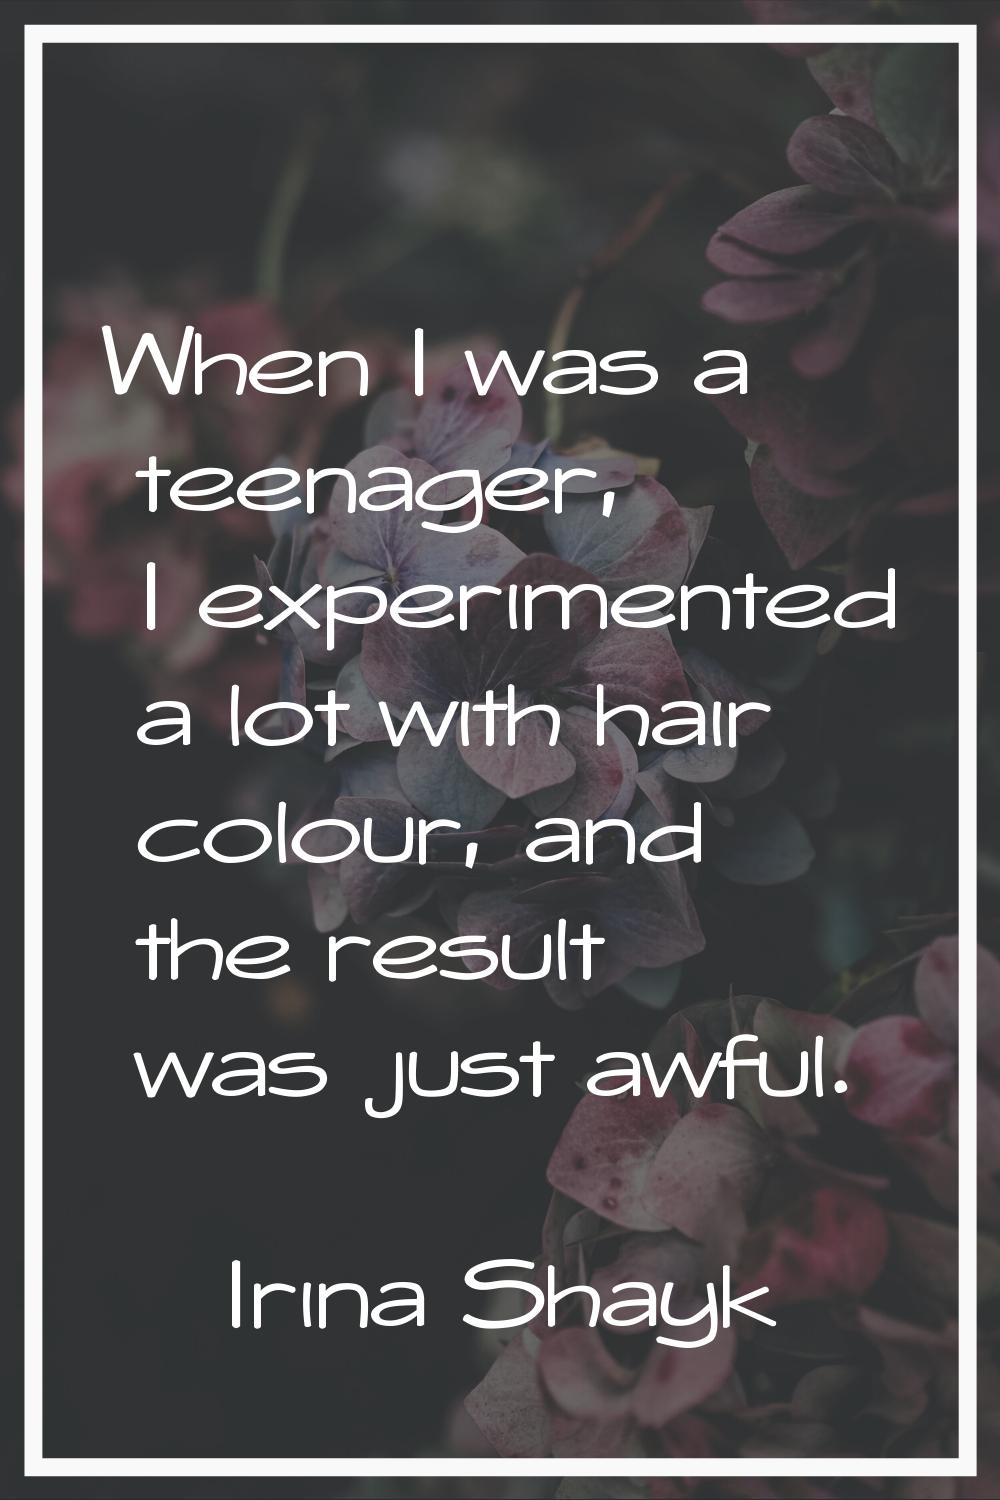 When I was a teenager, I experimented a lot with hair colour, and the result was just awful.